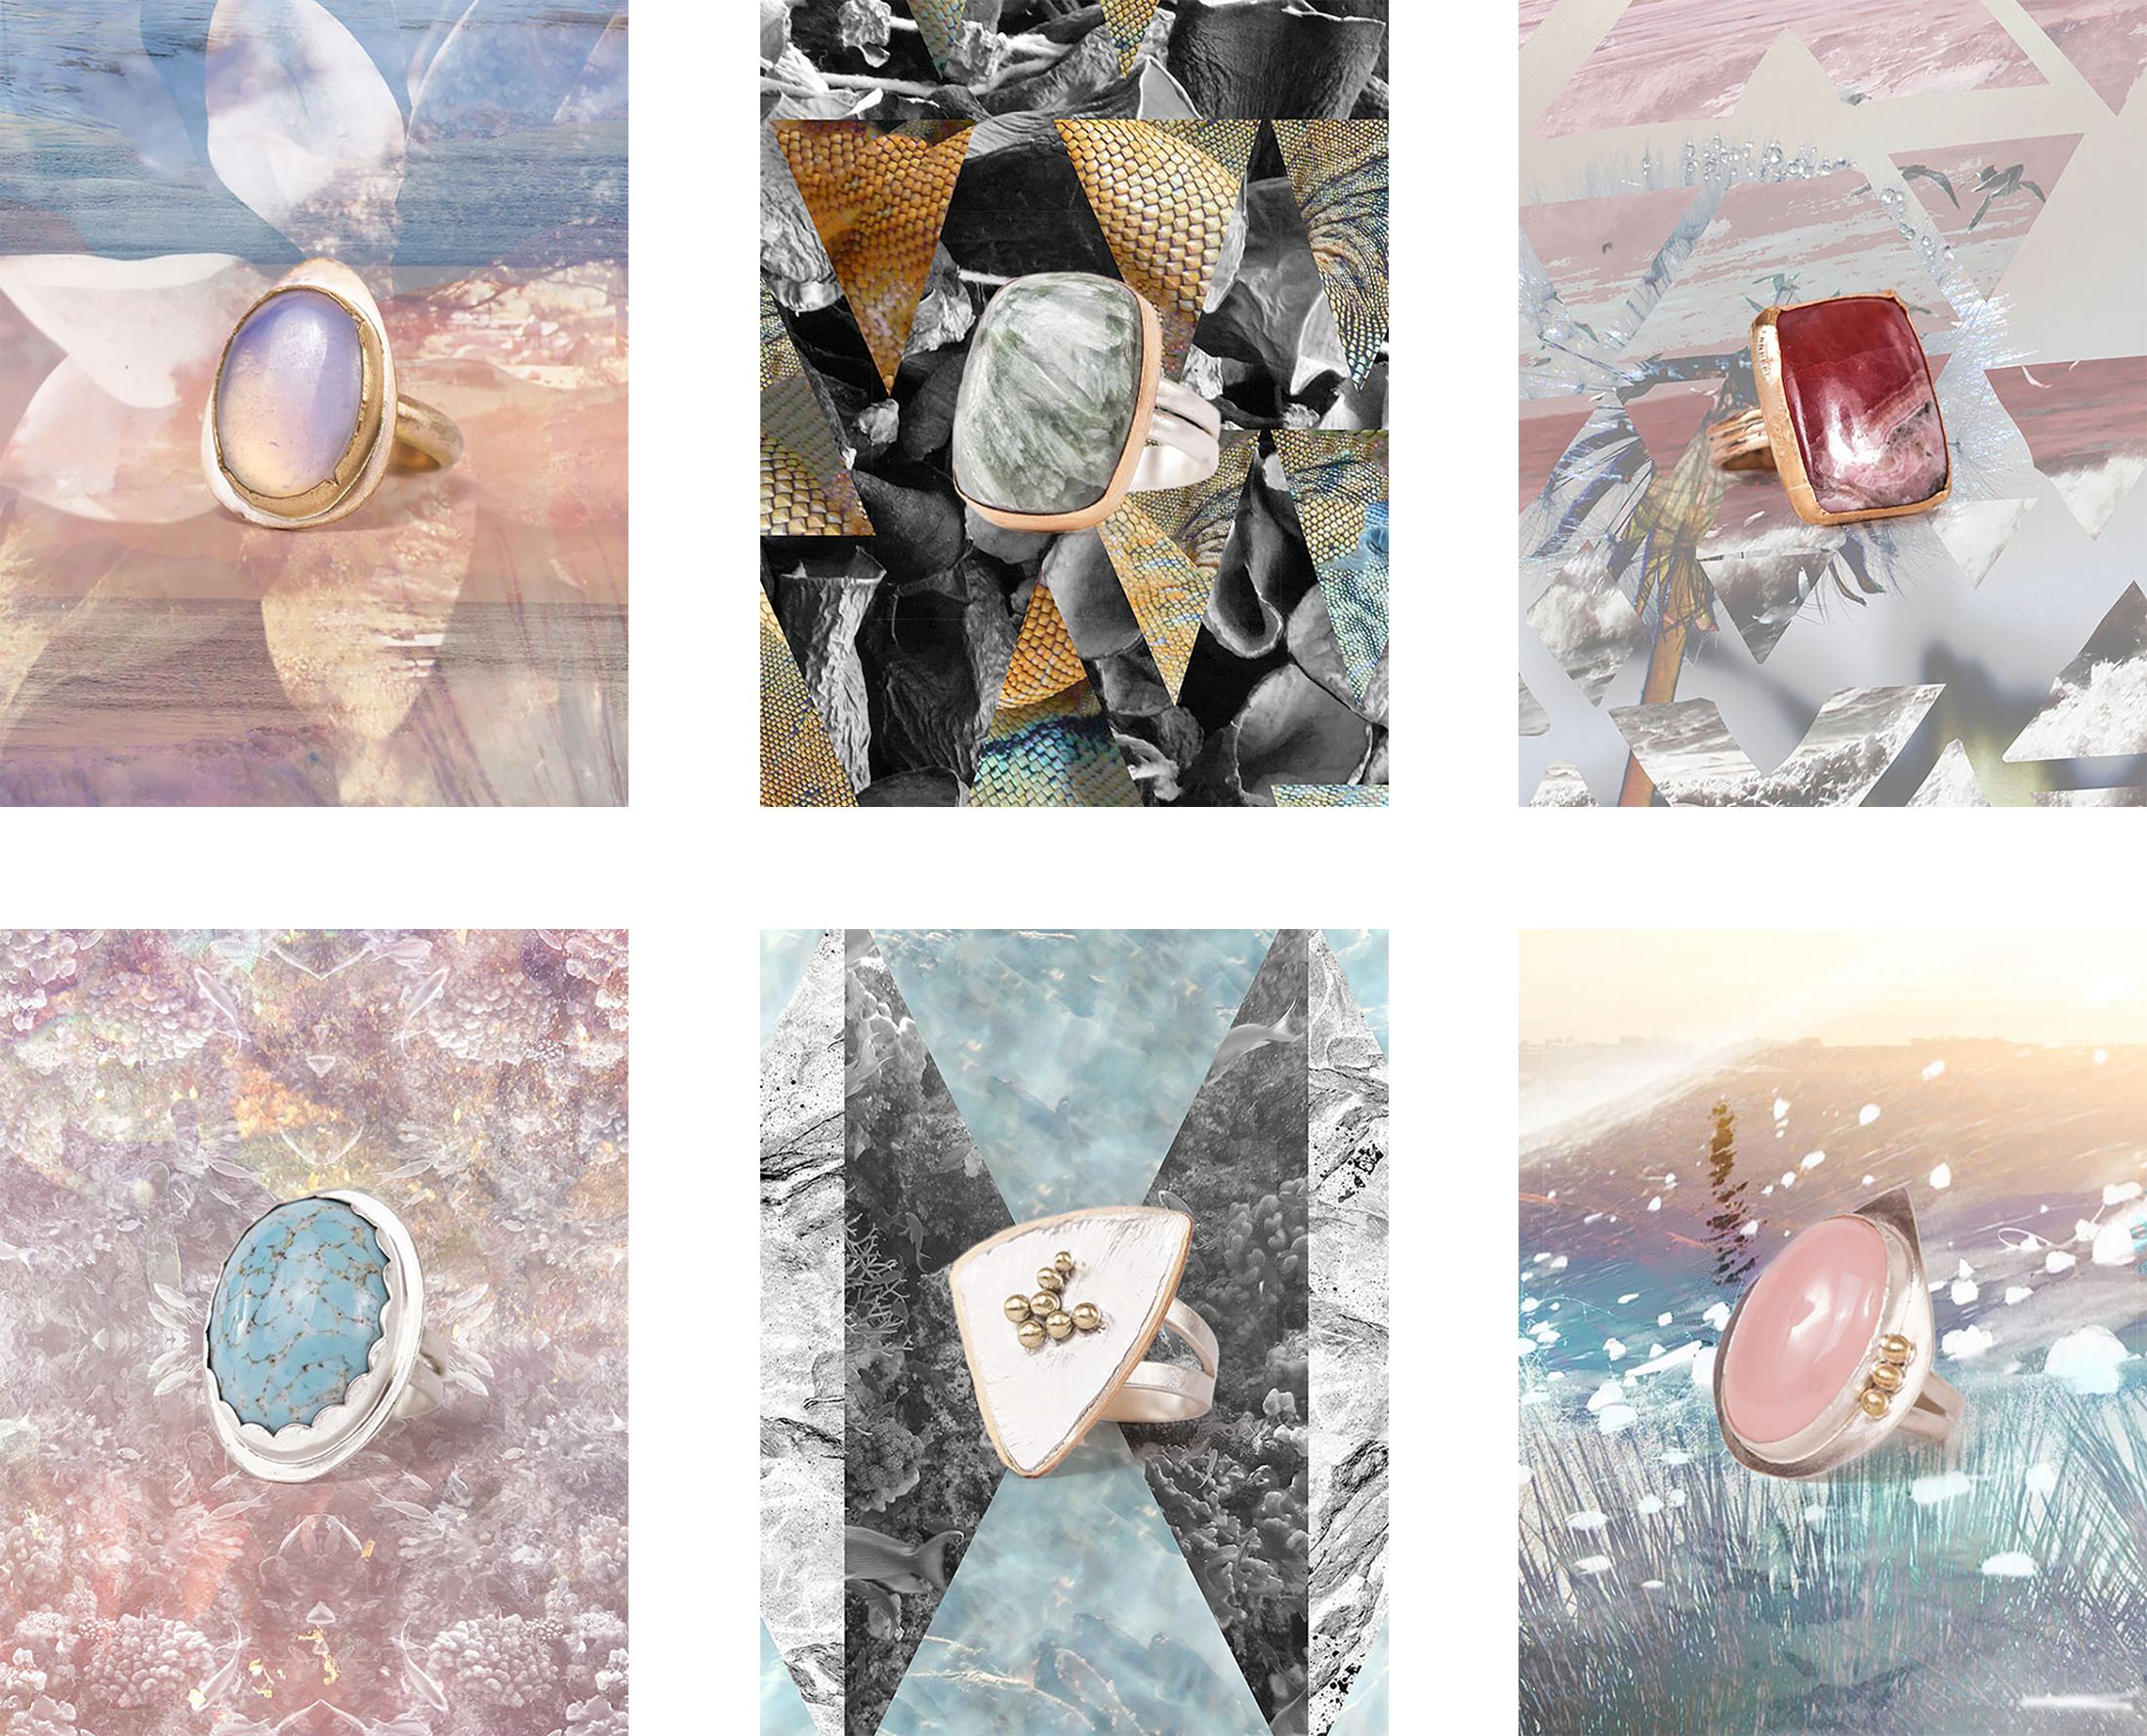 6 organic shaped rings made by Olwen Jewelry with large stones in the middle, crafte out of silver, gold and rose gold, against a variety of photo manipulated backgrounds.